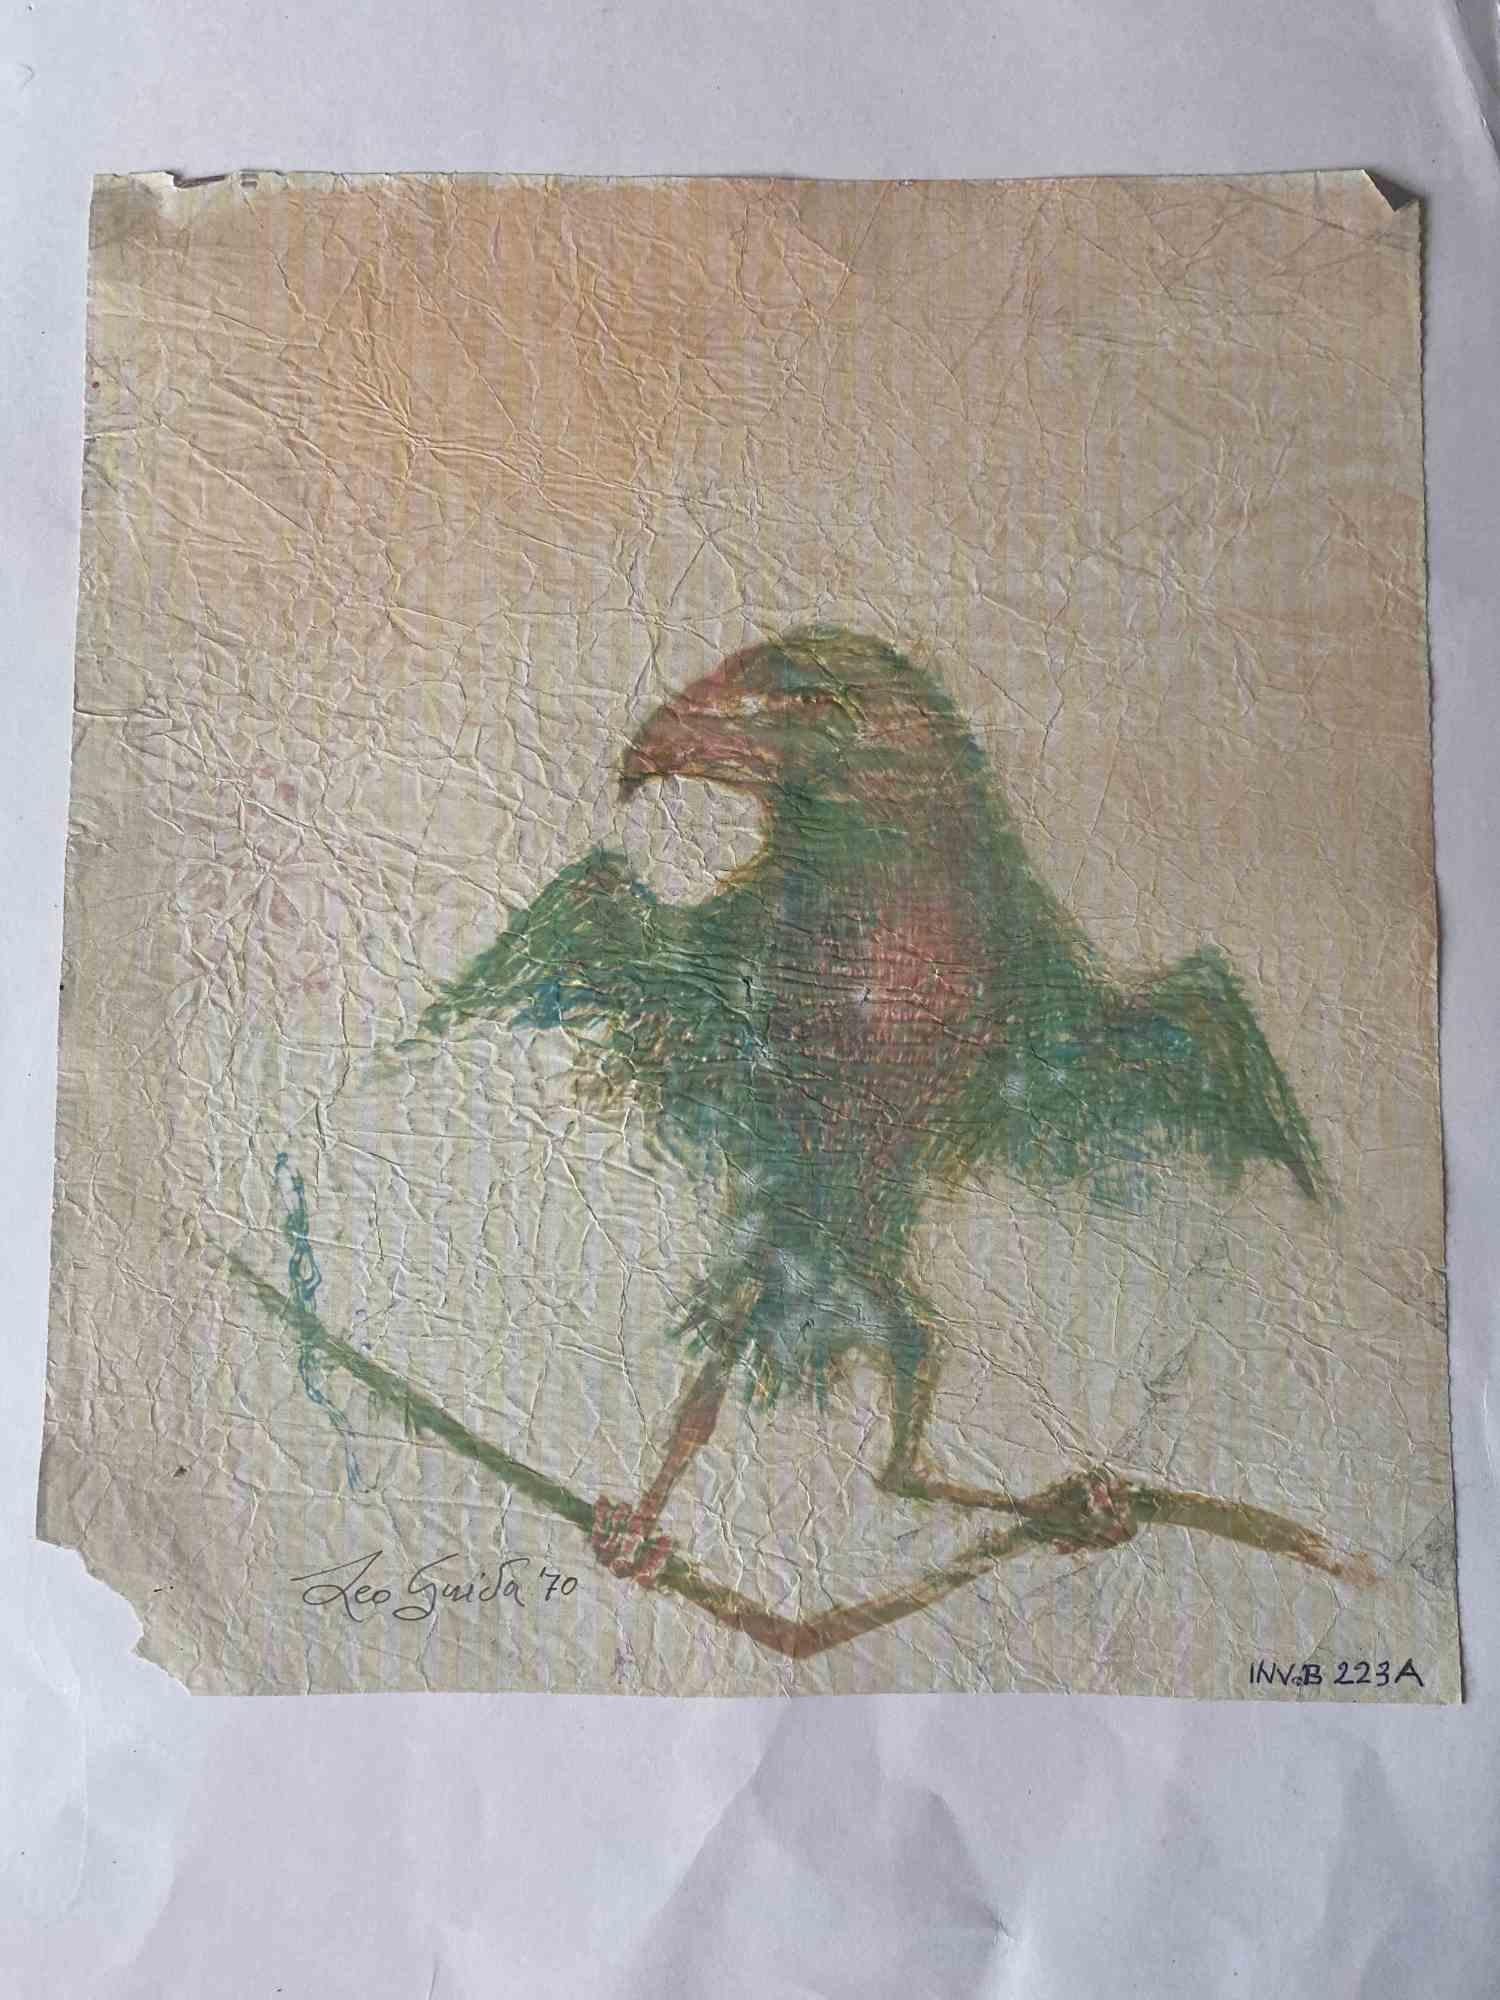 Eagle and Crow is an original Contemporary artwork realized in 1970s by the italian Contemporary artist  Leo Guida  (1992 - 2017).

Original drawing in mixed media on ivory-colored paper, glued on cardboard (50 x 35 cm)

Hand-signed and dated on the